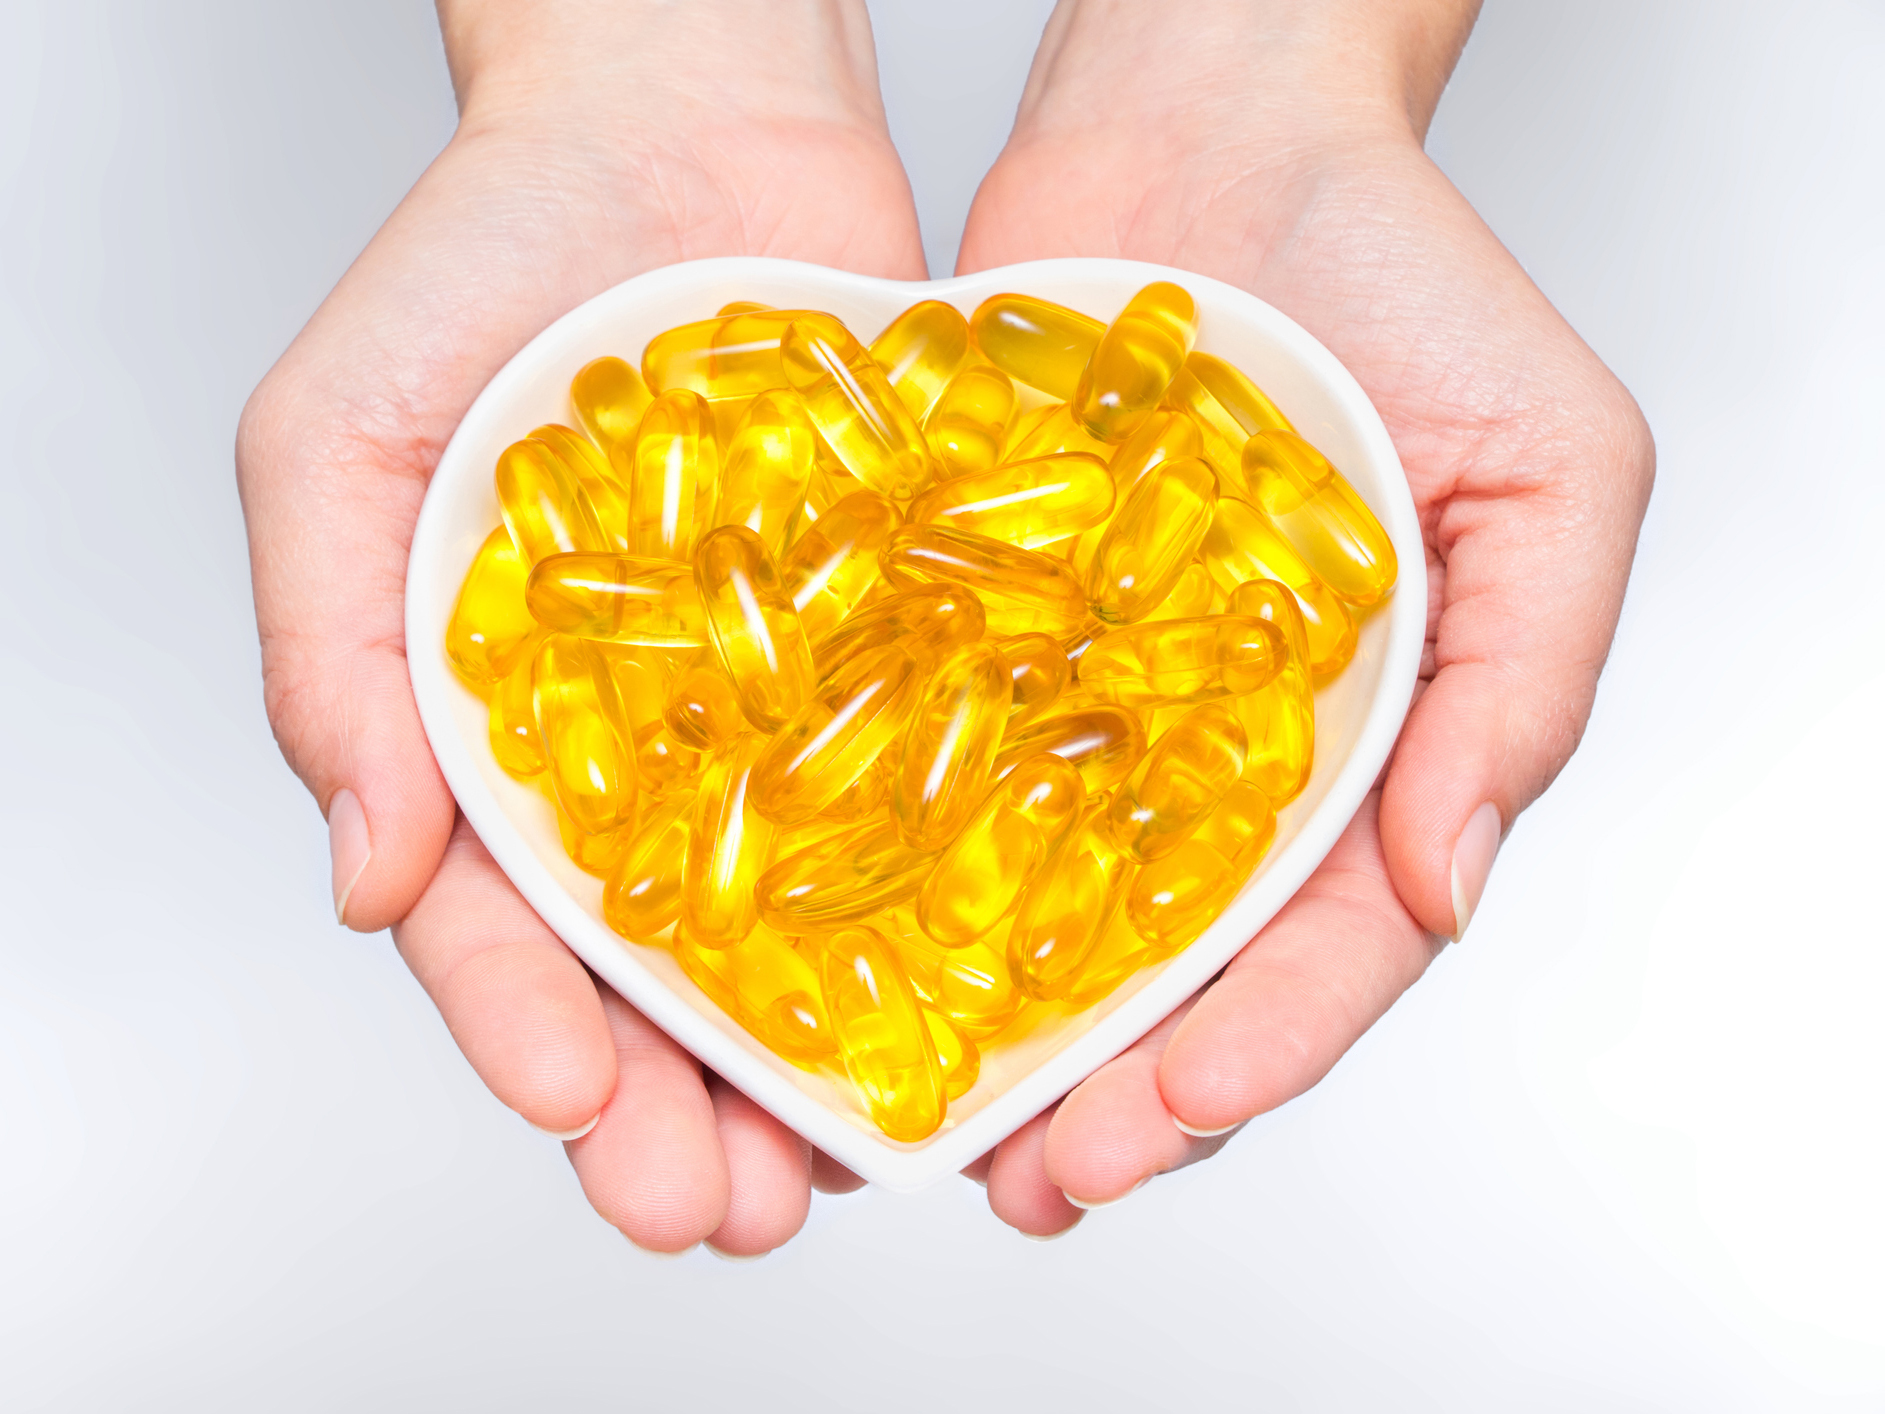 The mega-analysis that validated fish oil’s heart benefits